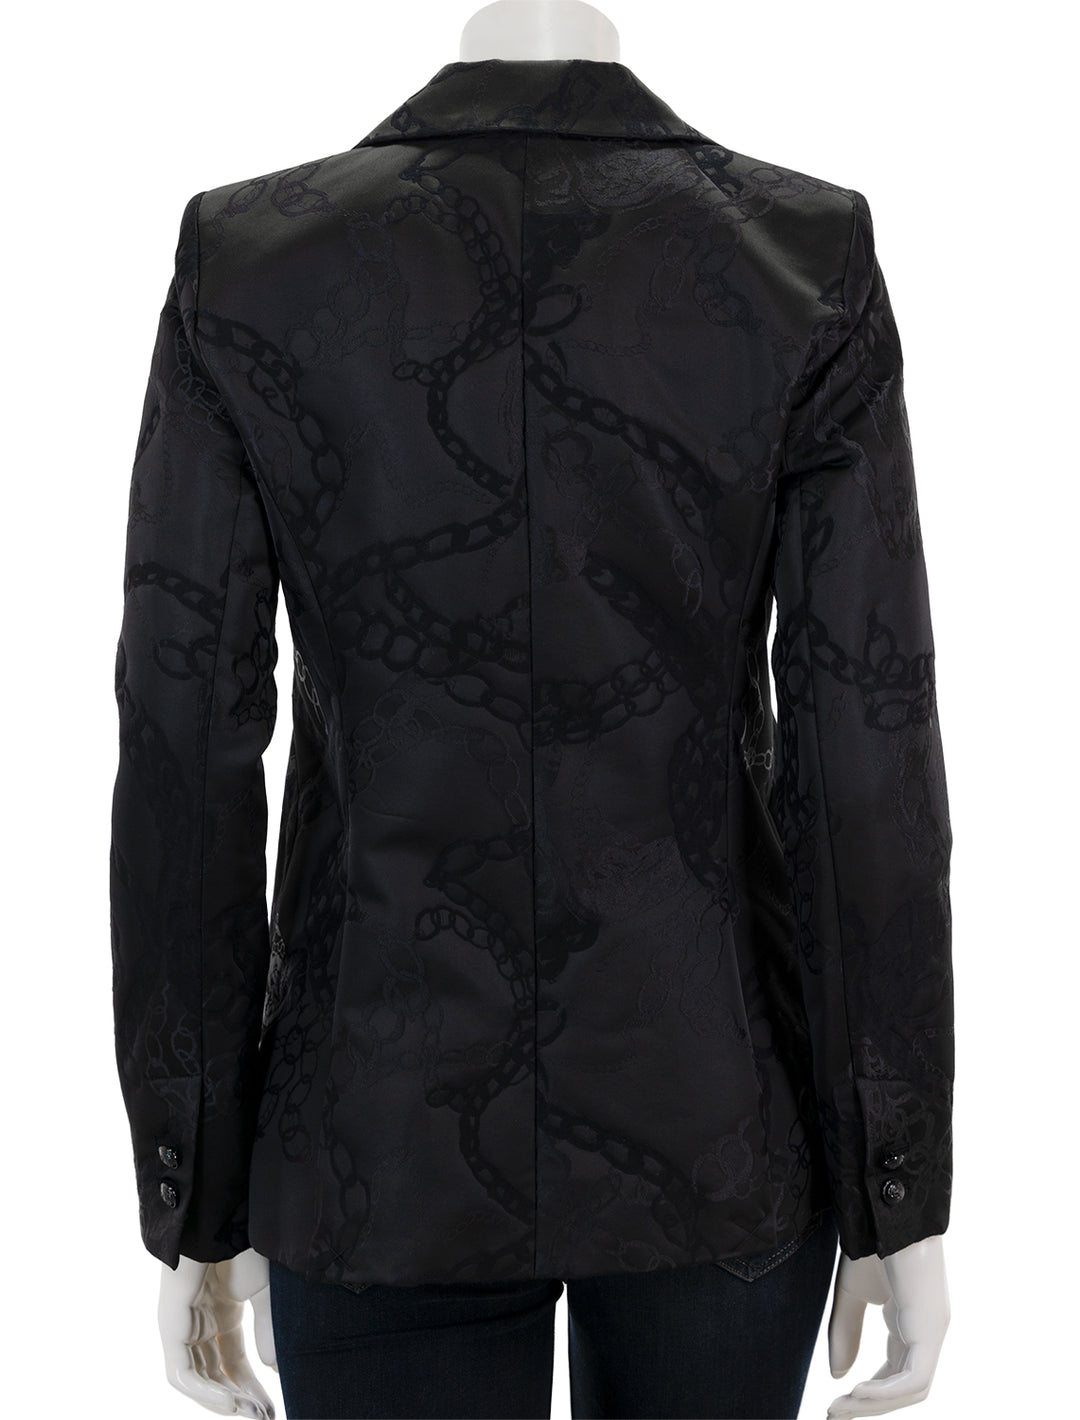 Back view of L'agence's chamberlin blazer in black multi chain.